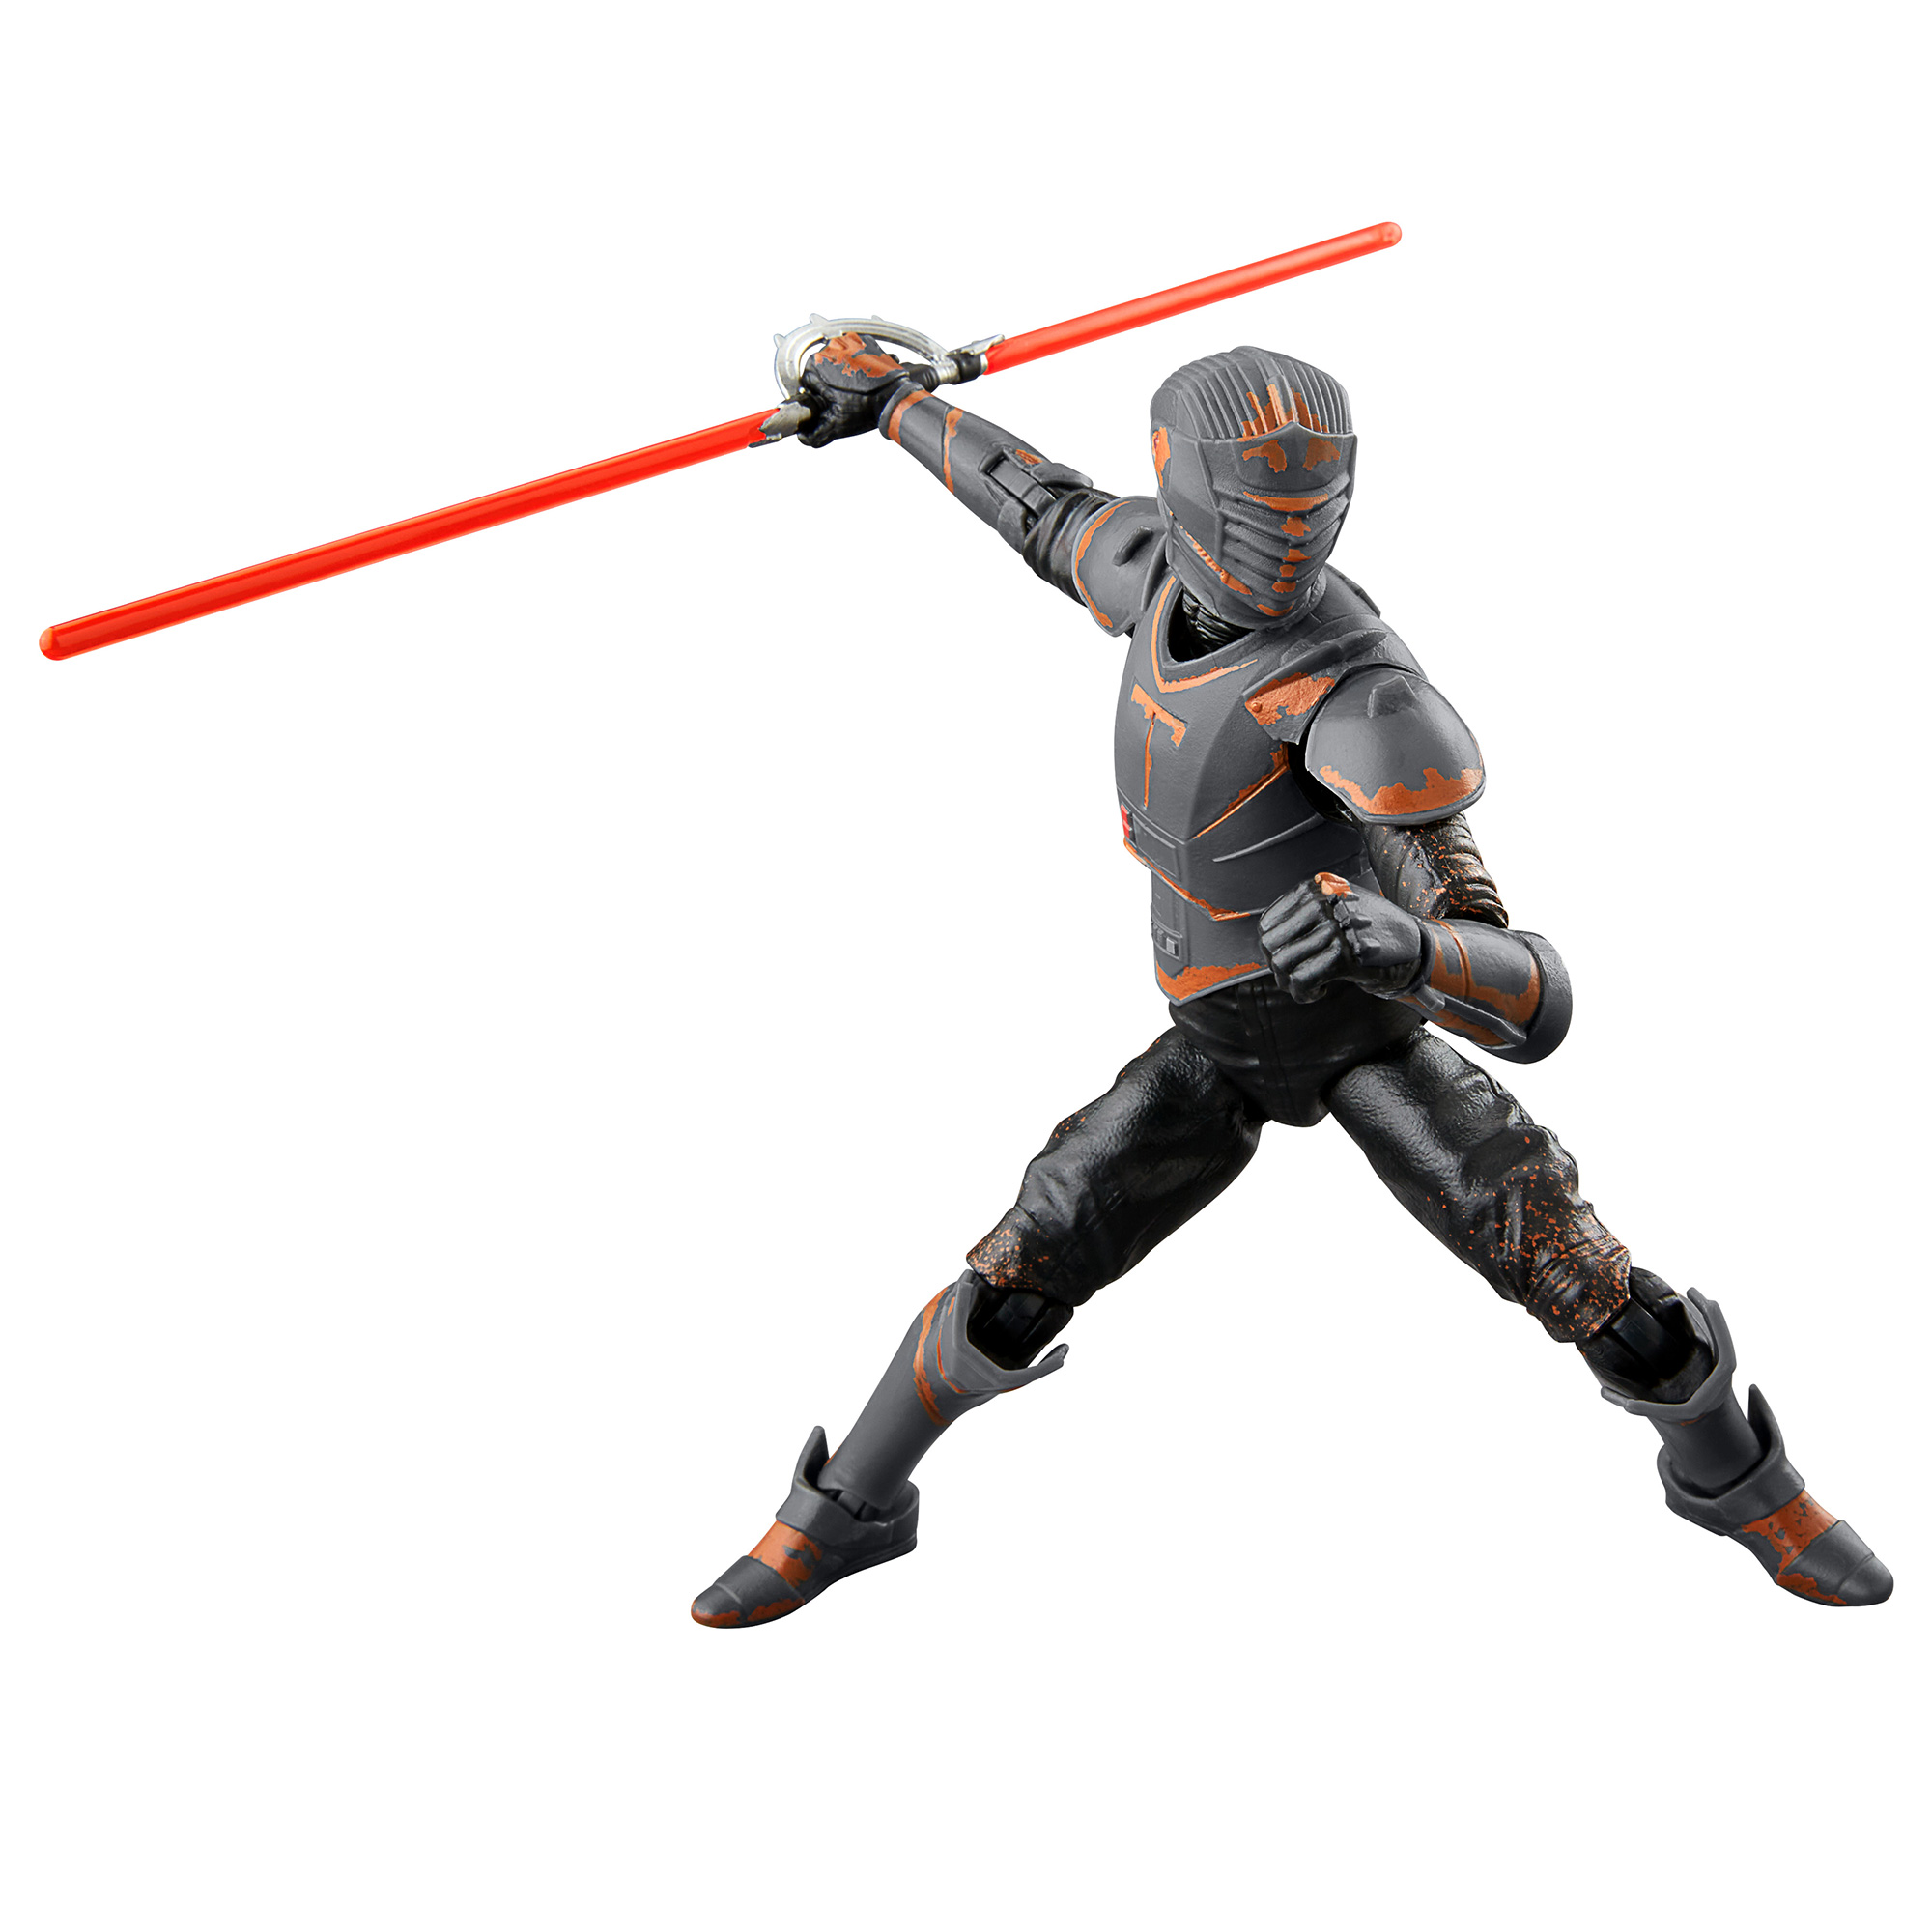 Press Release 8/29/23 - New The Black Series Reveals